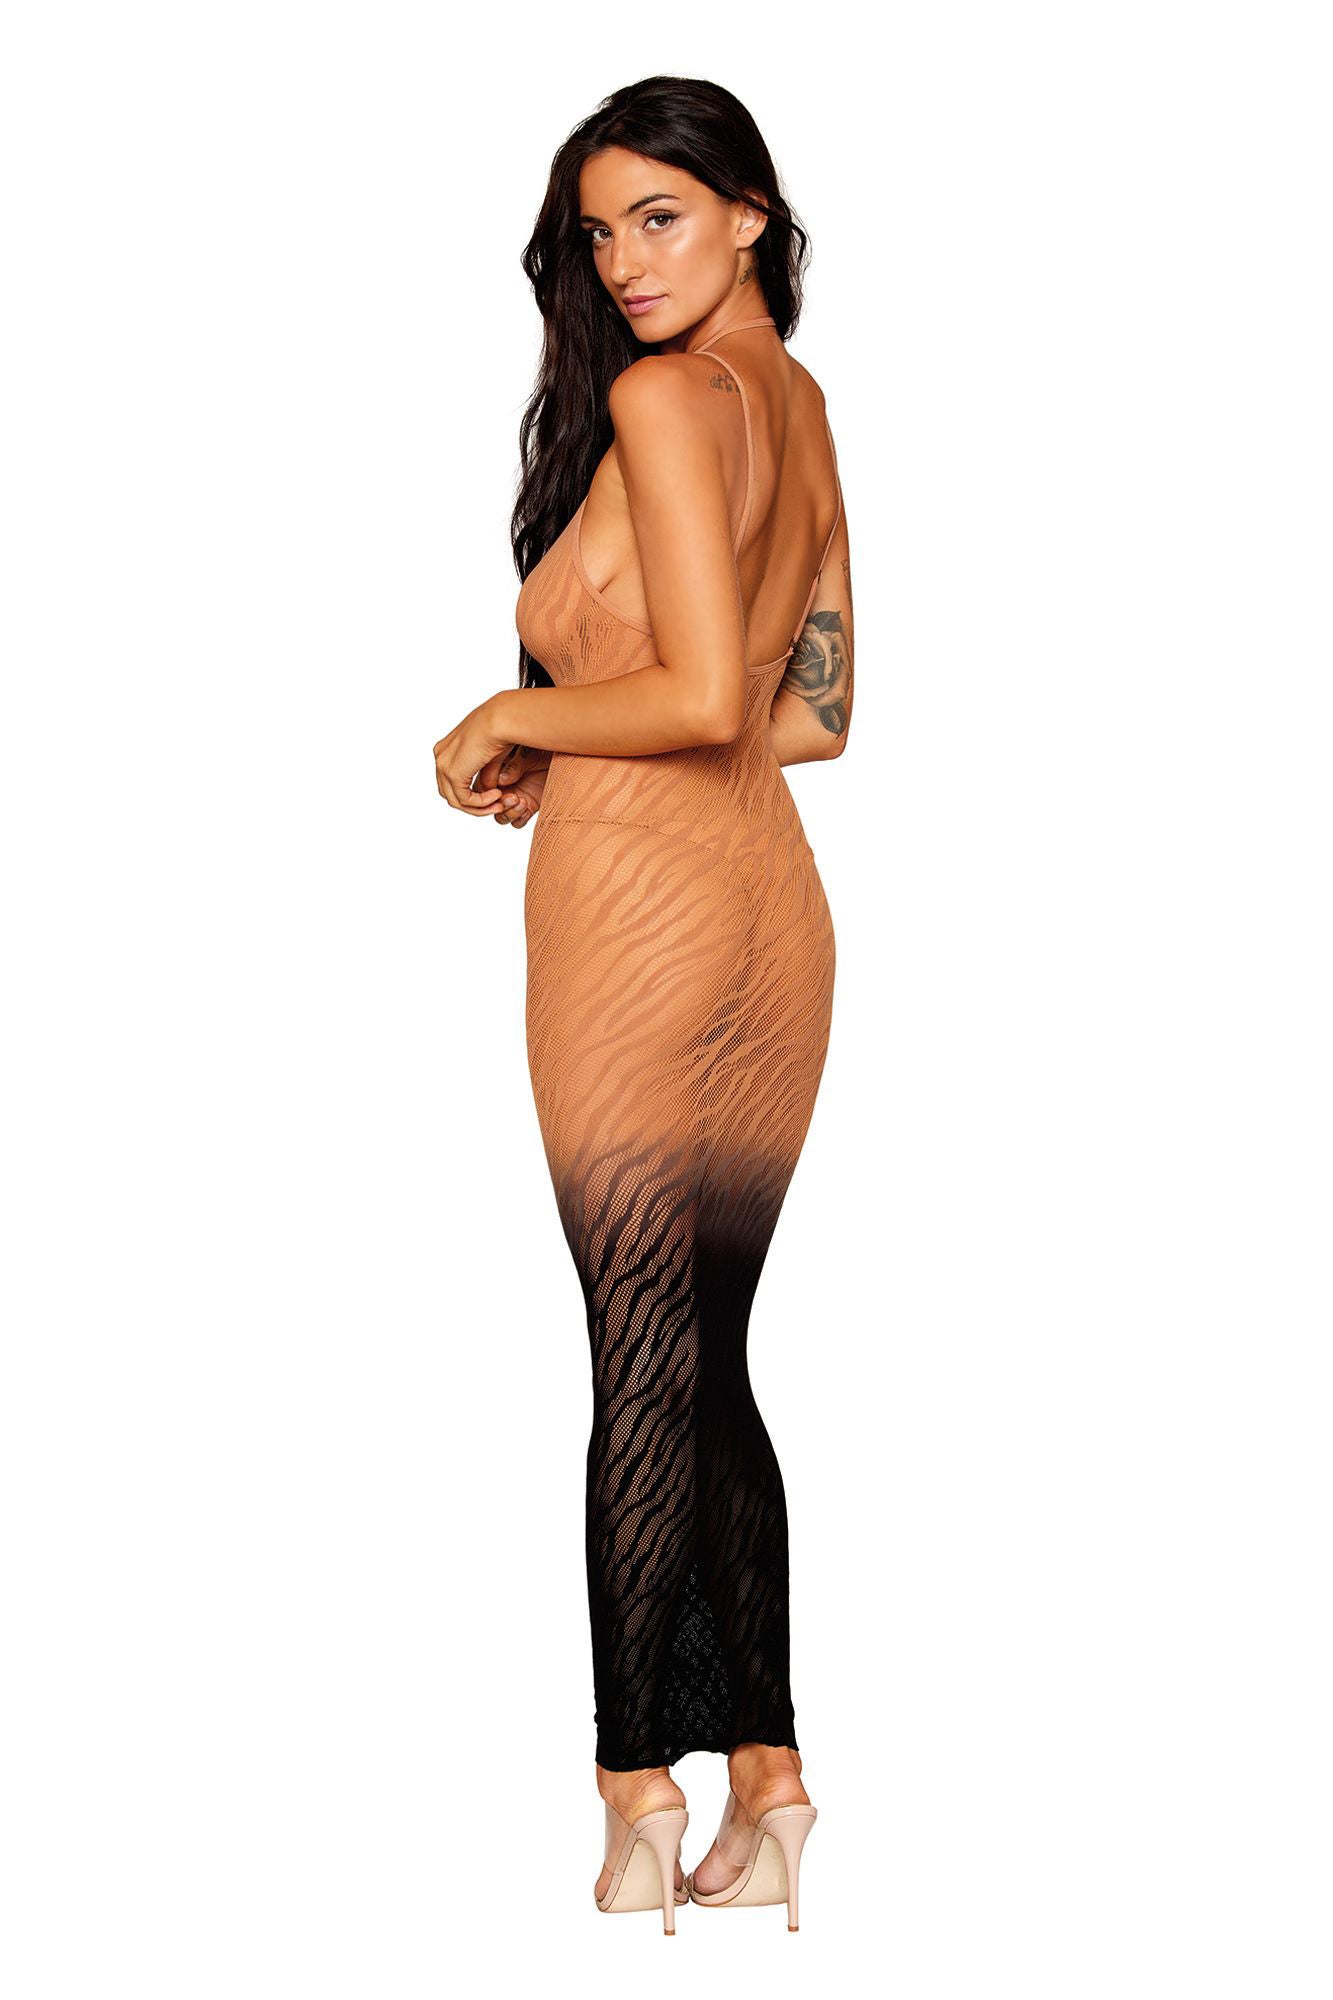 Bodystocking Gown - One Size - Black/copper-0